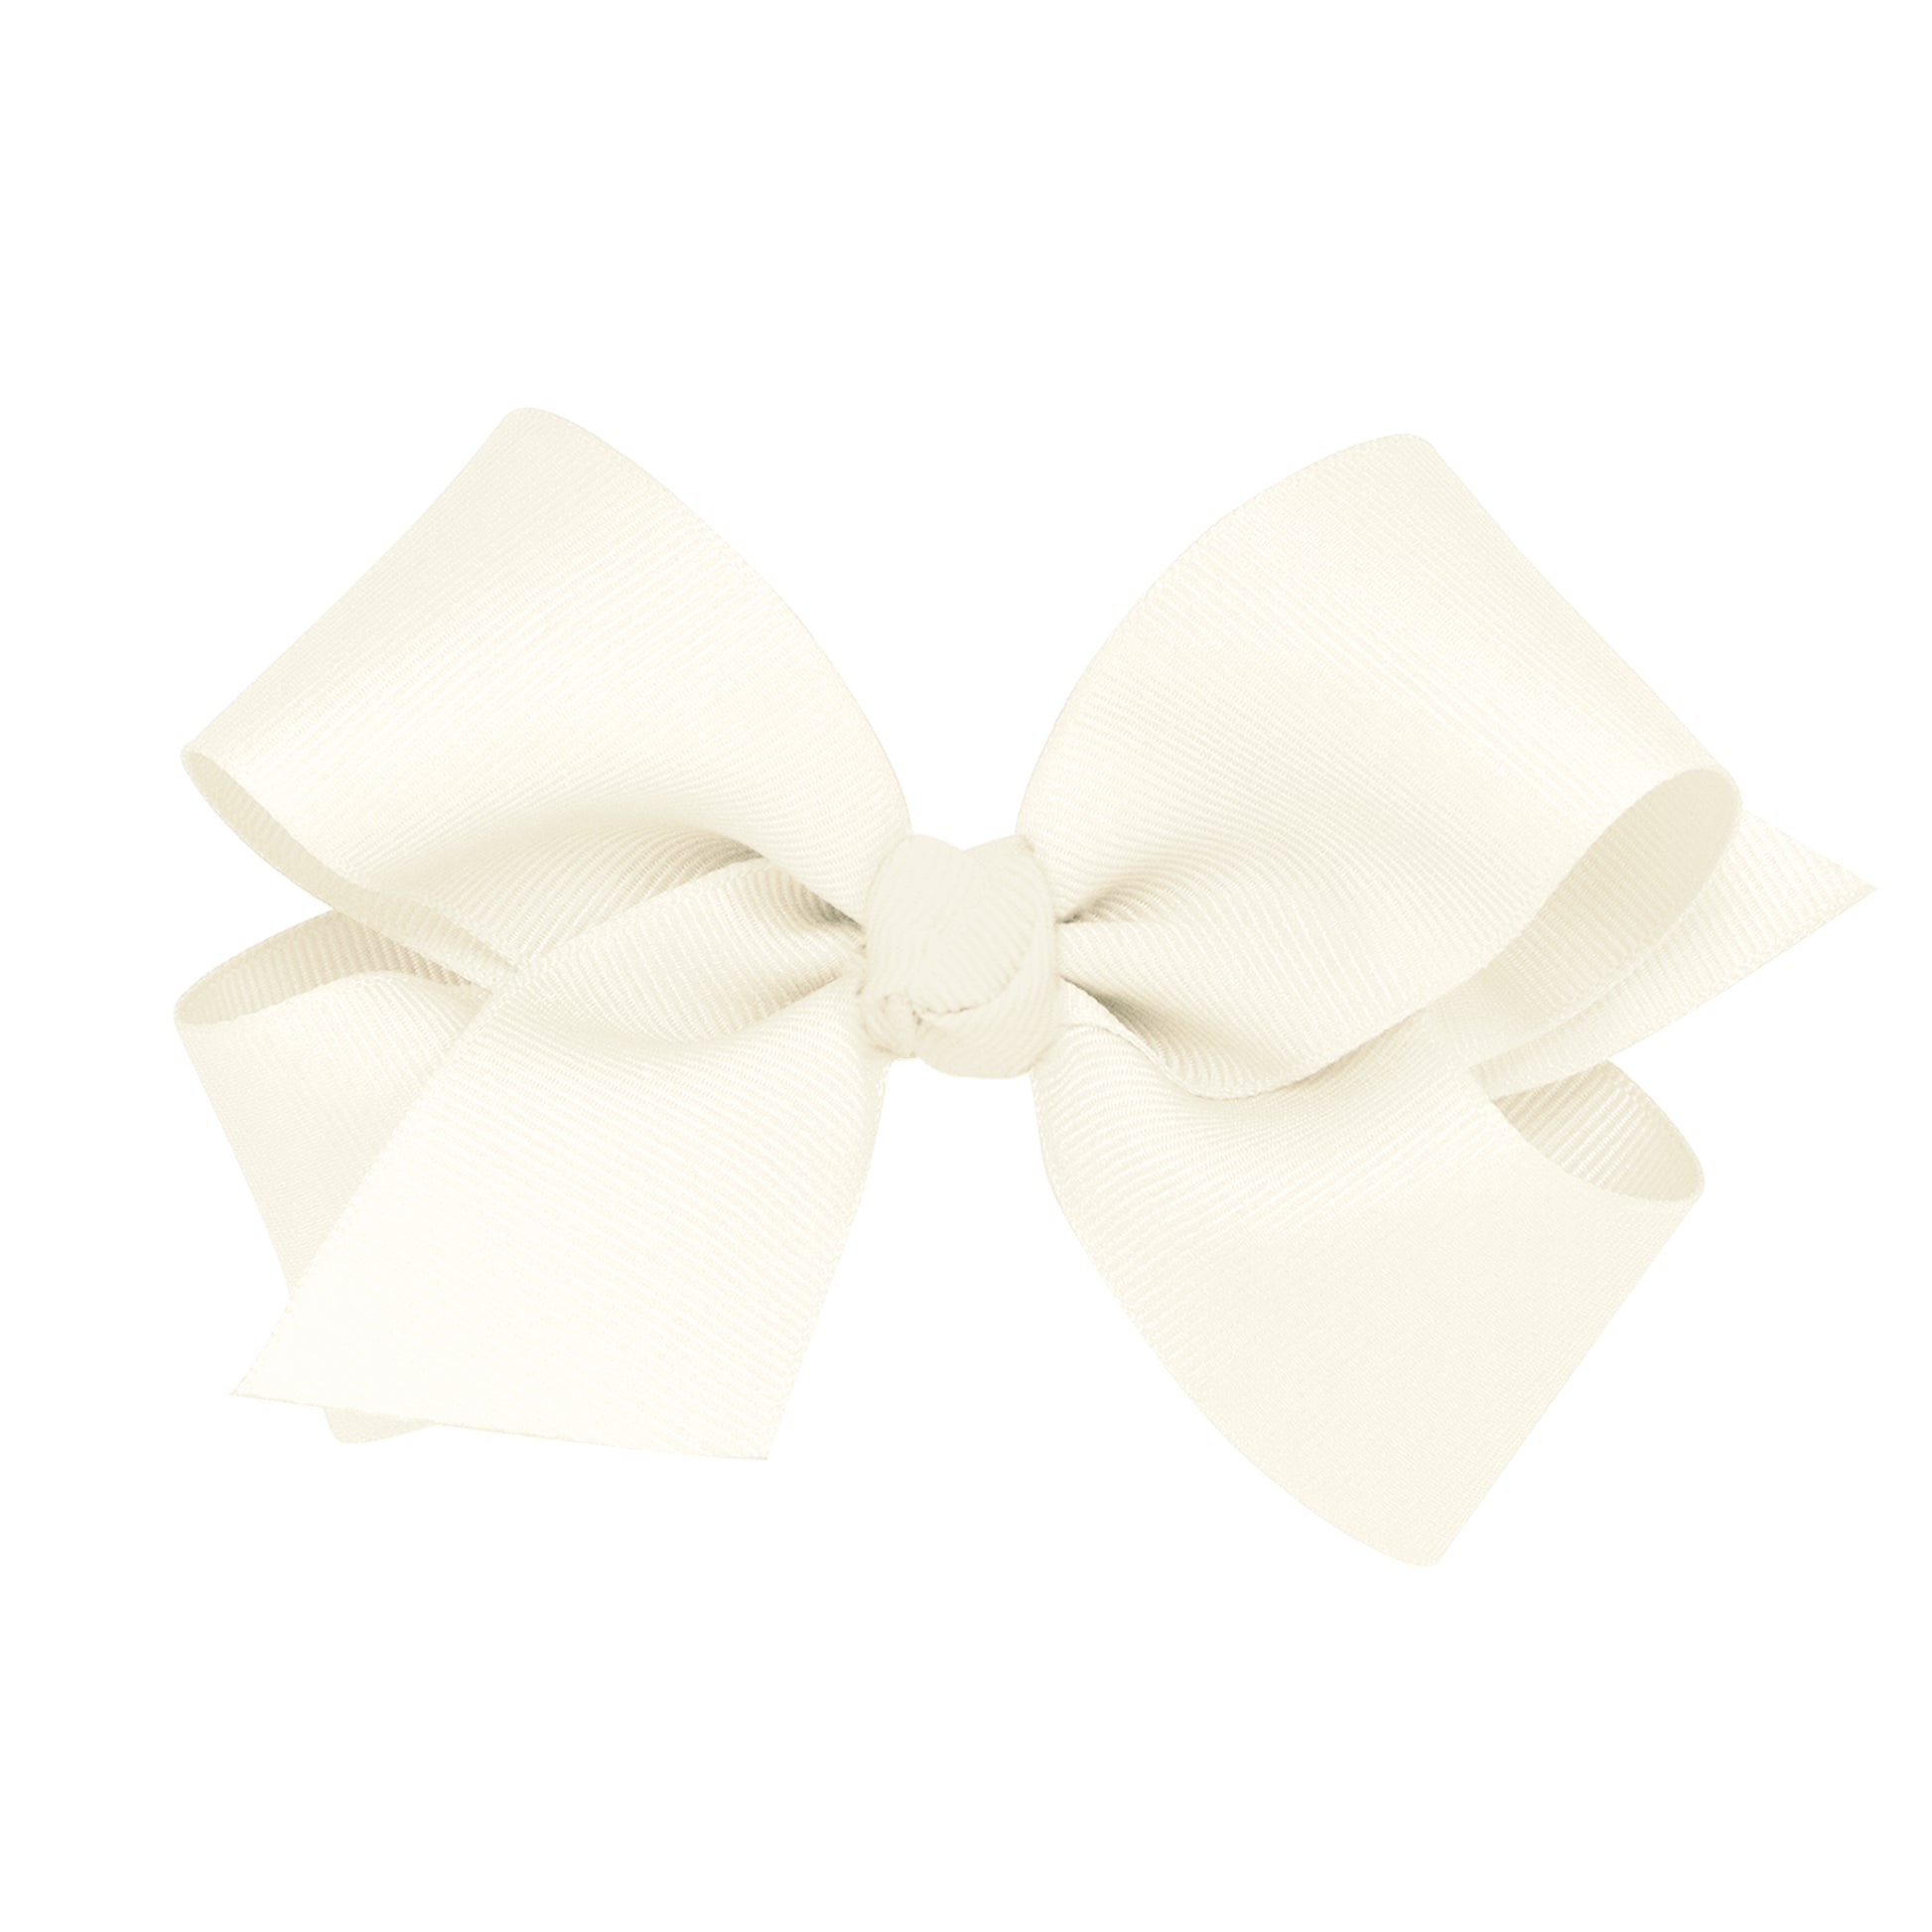 Wee Ones Medium Grosgrain Hair Bow with Center Knot  - Antique White